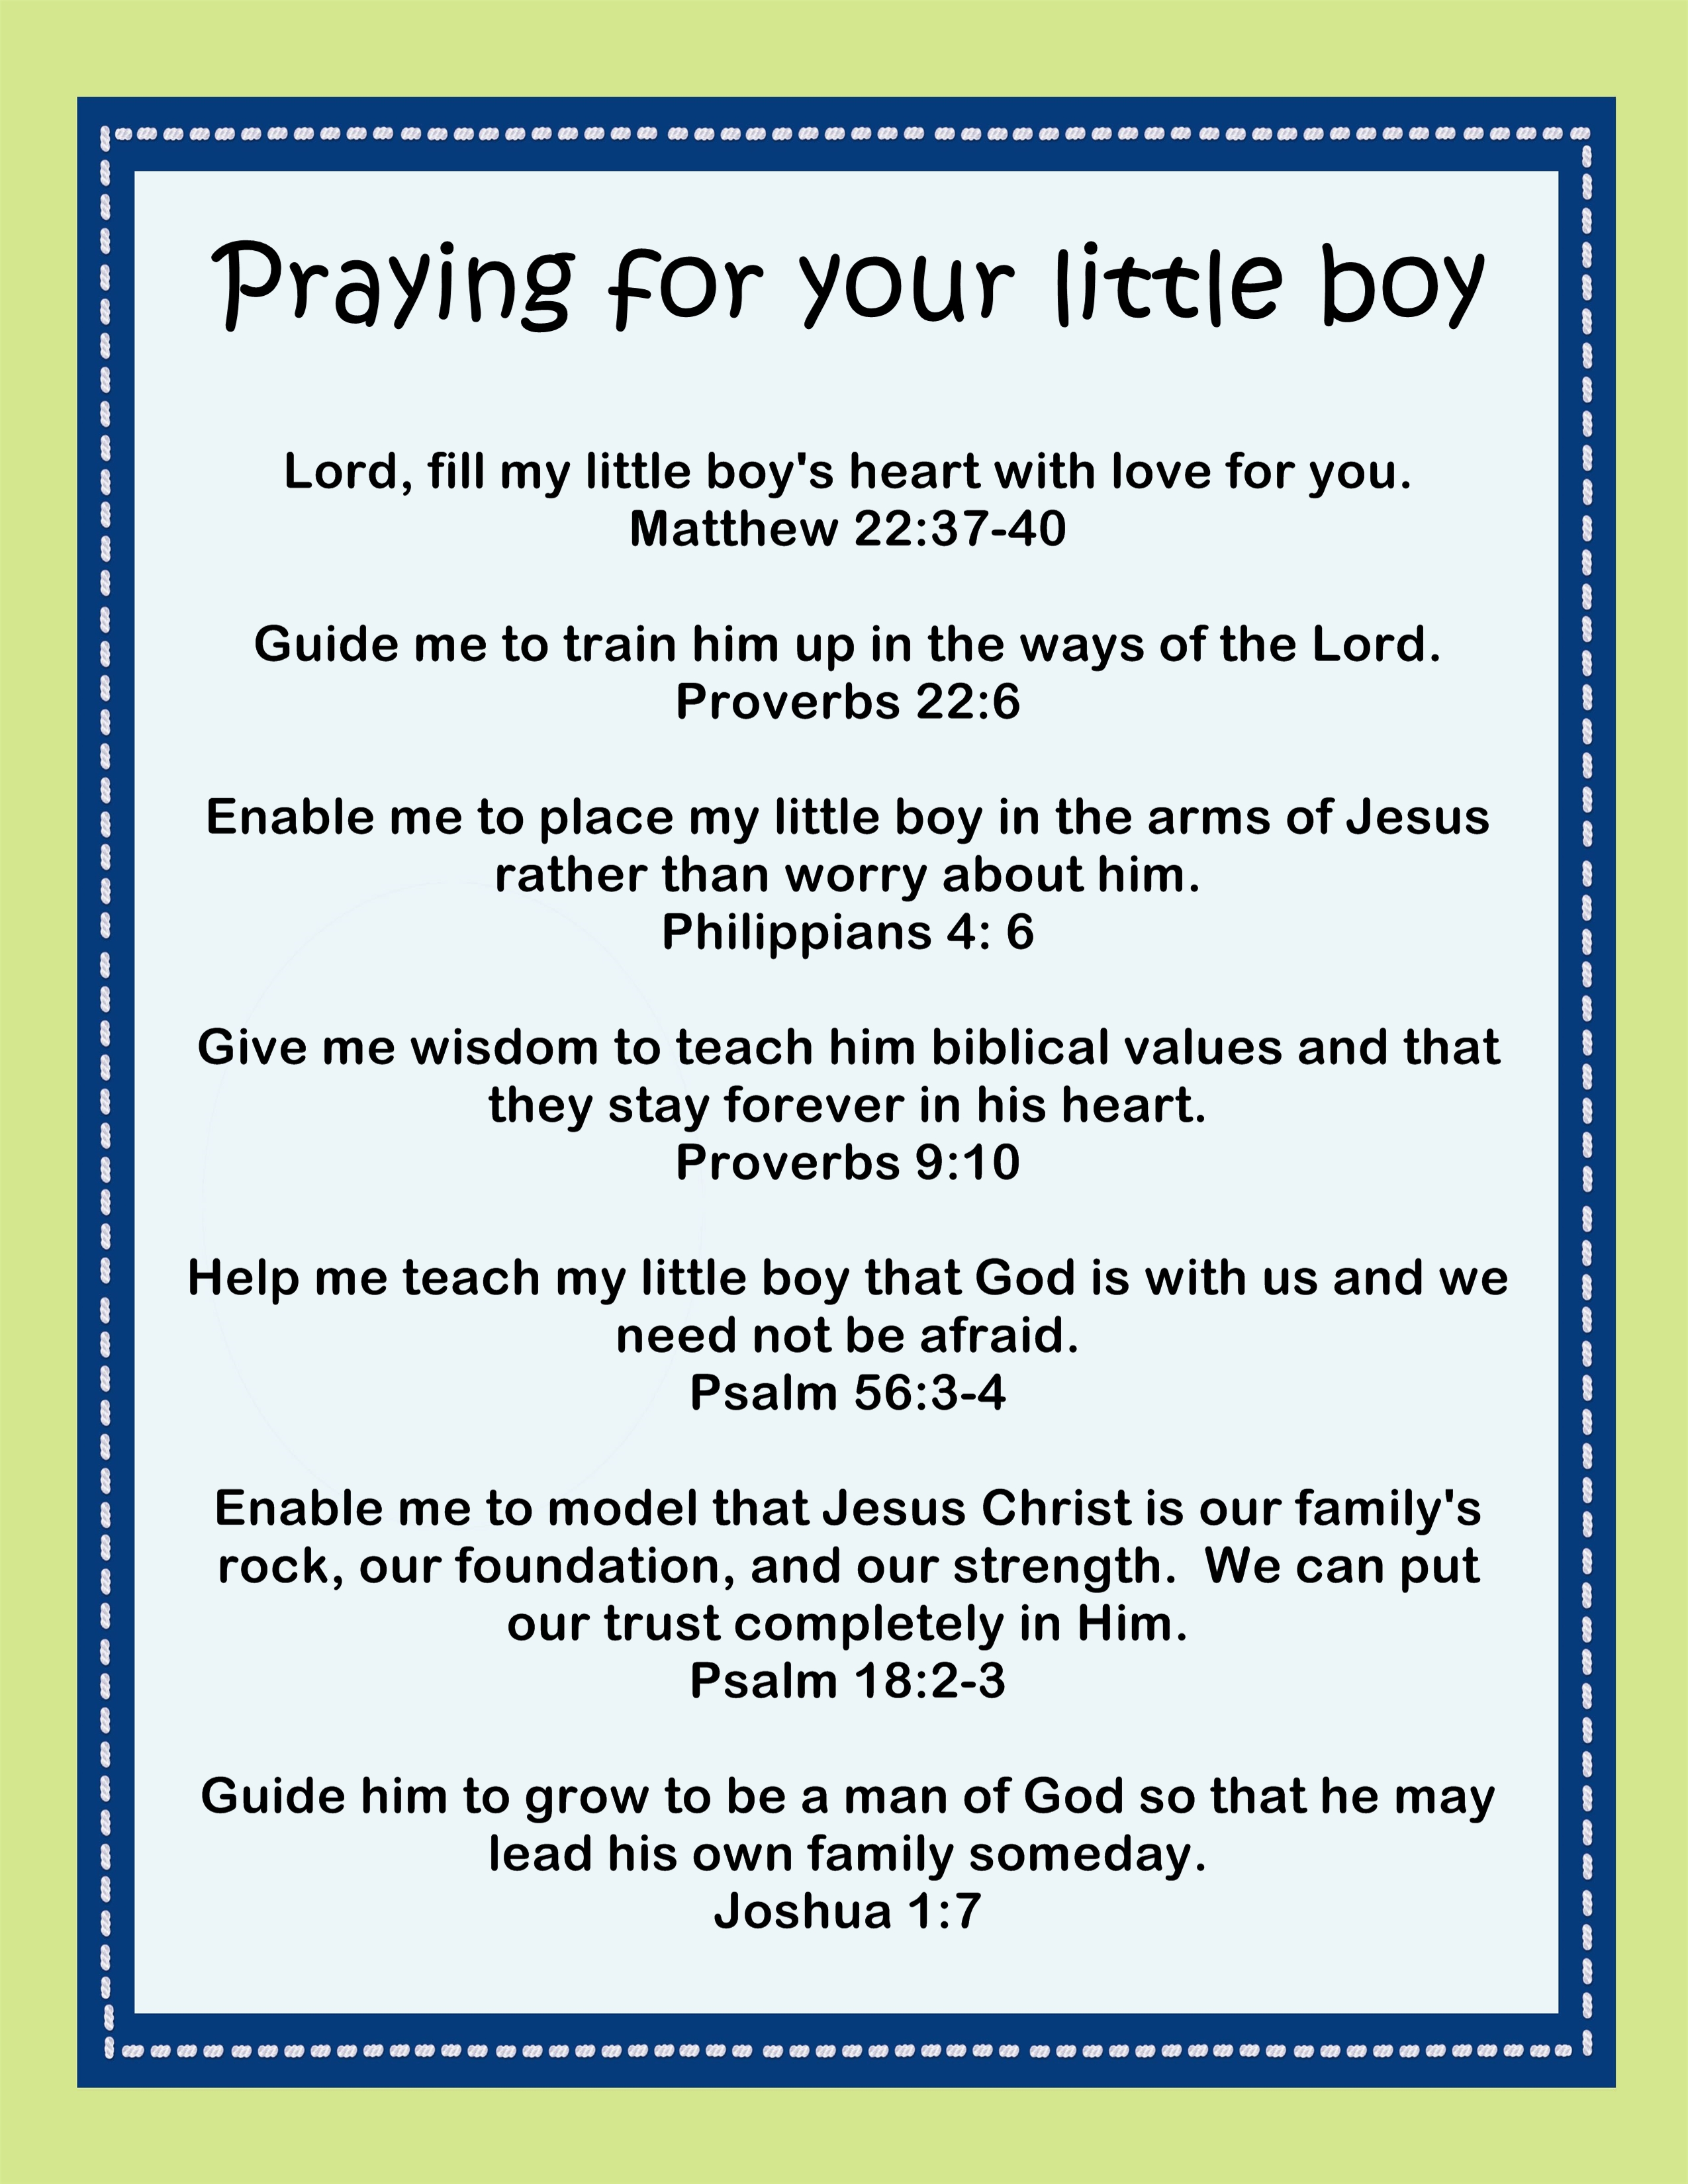 praying for your little boy